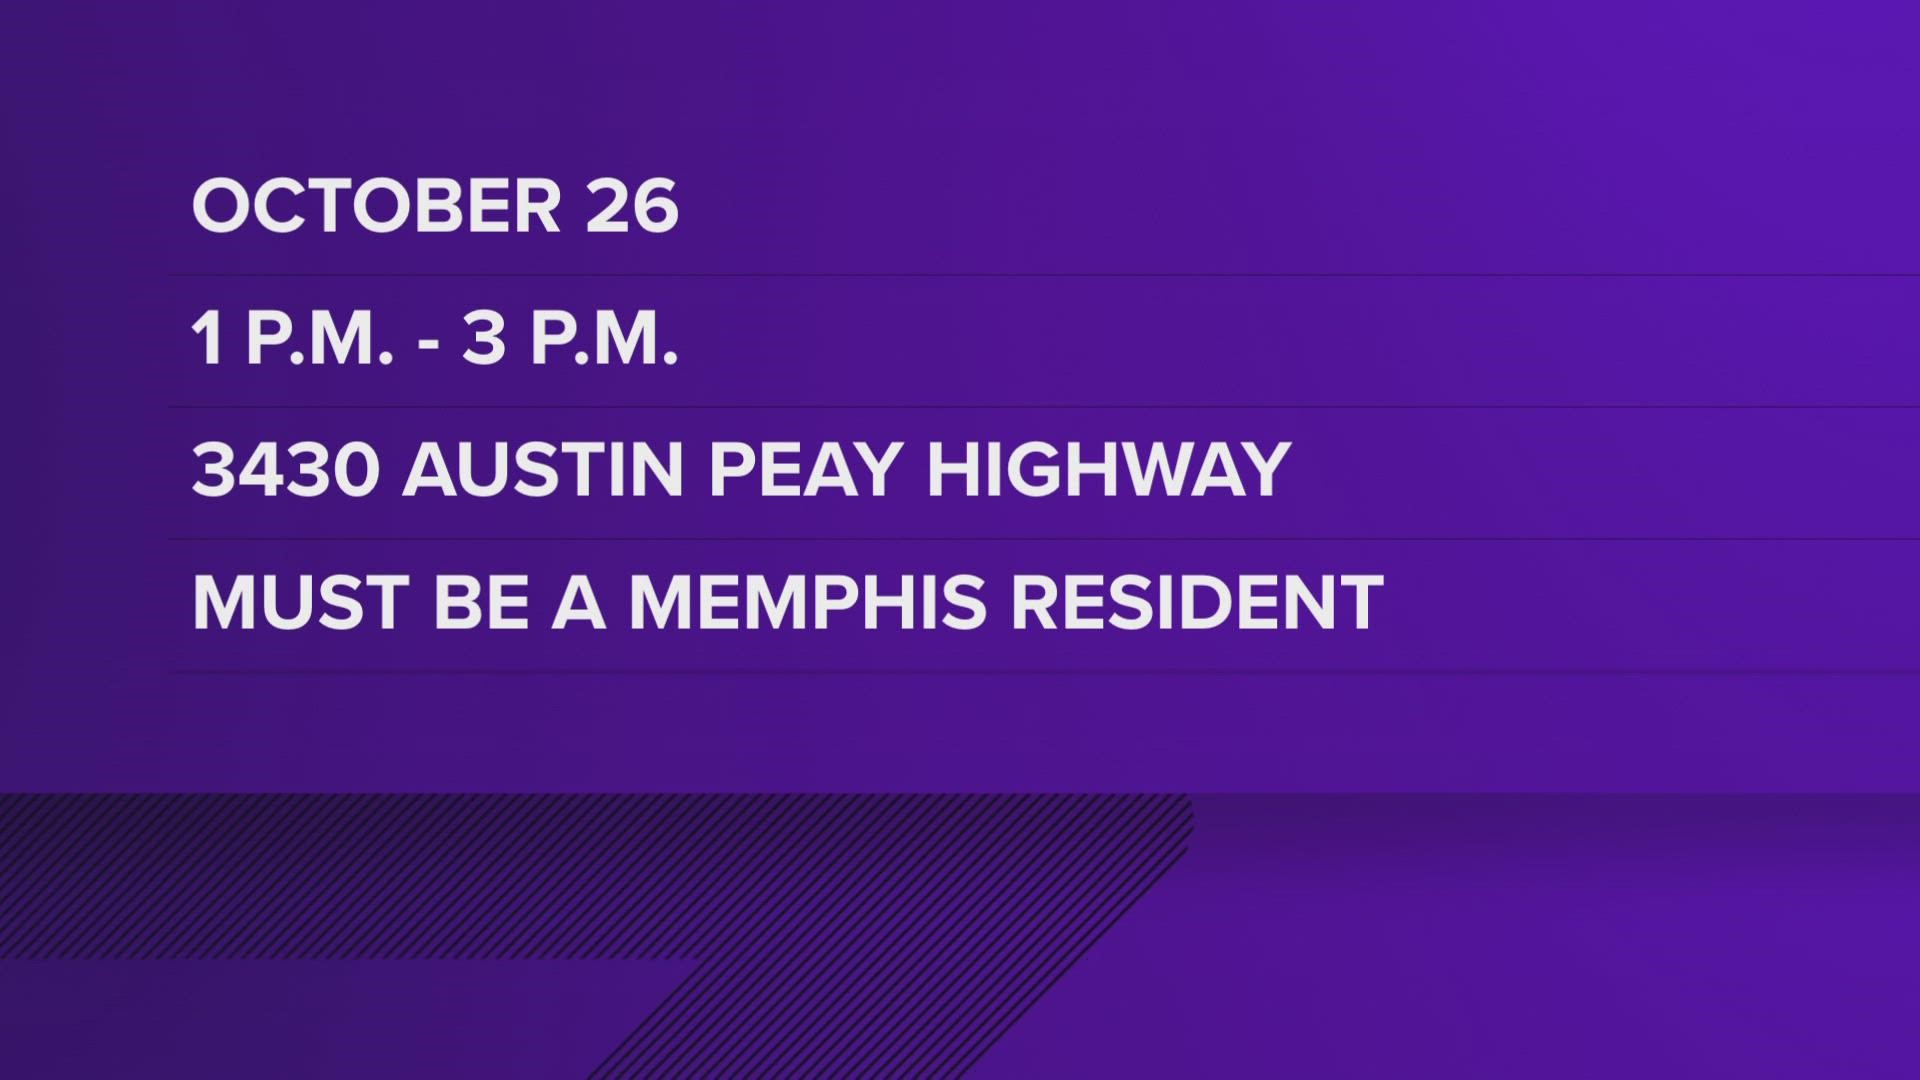 One wheel lock per car will be provided while supplies last to any Memphis resident that goes to the giveaway.